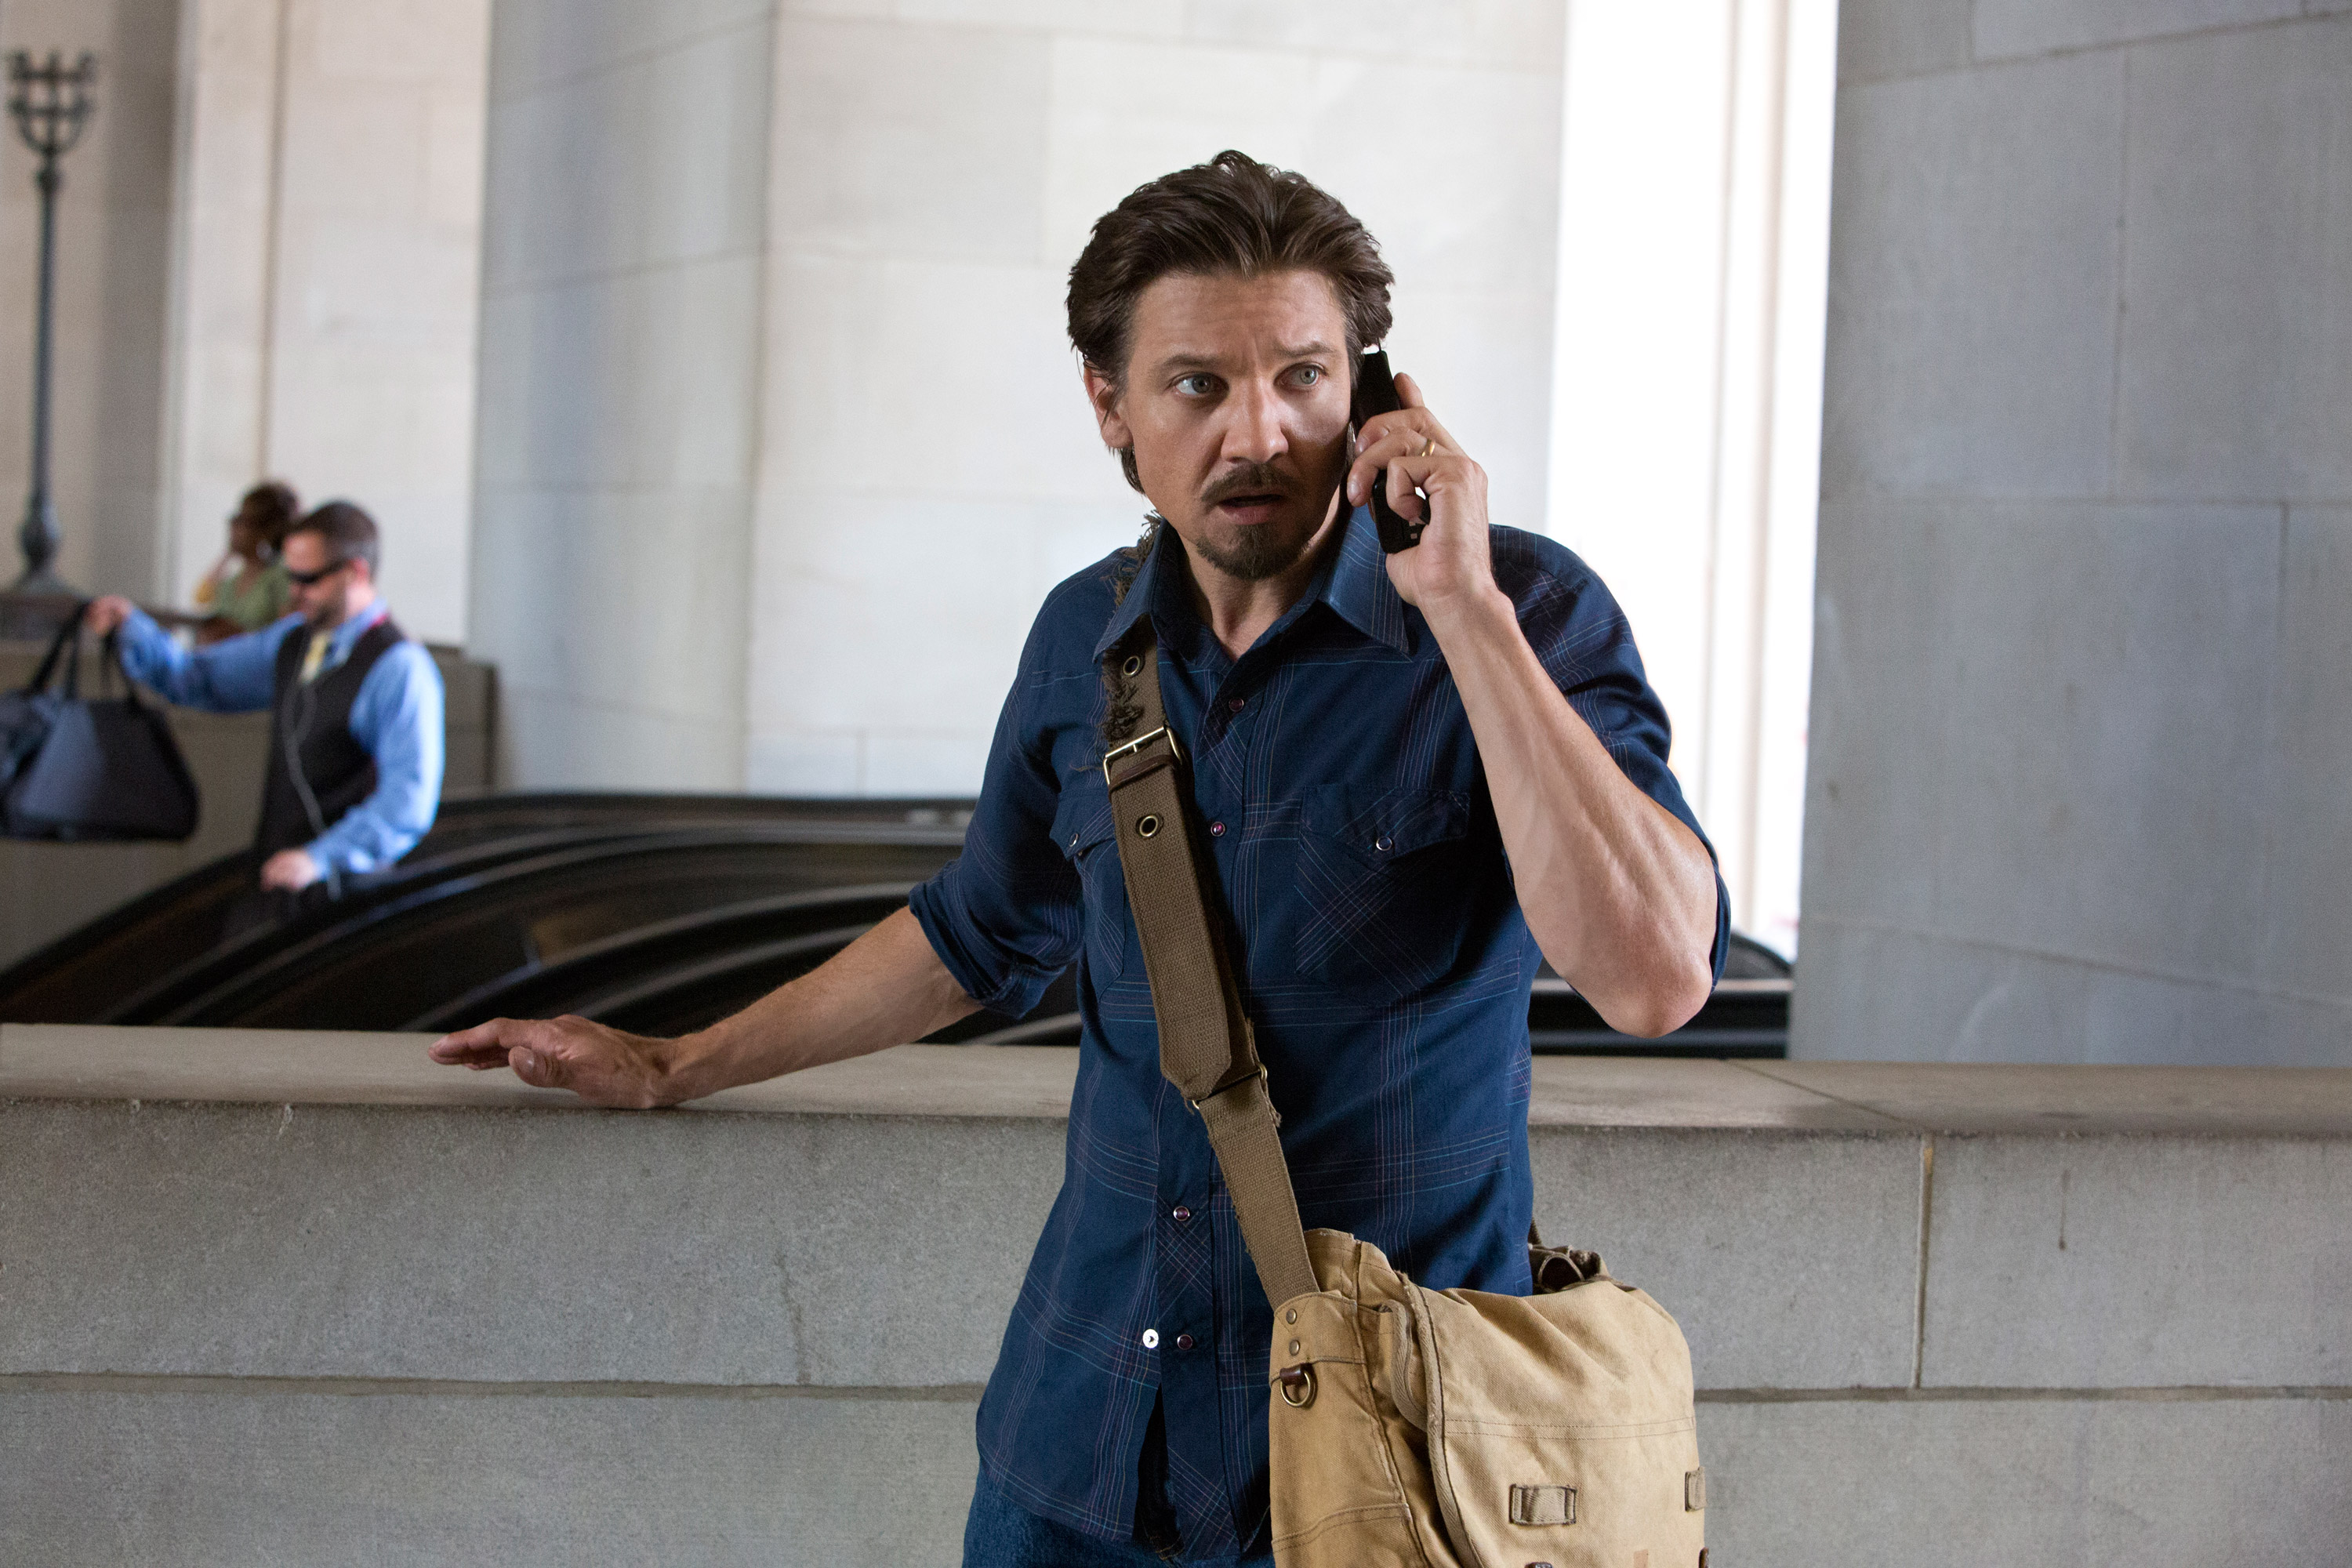 KILL THE MESSENGER Does Its Subject Some Service